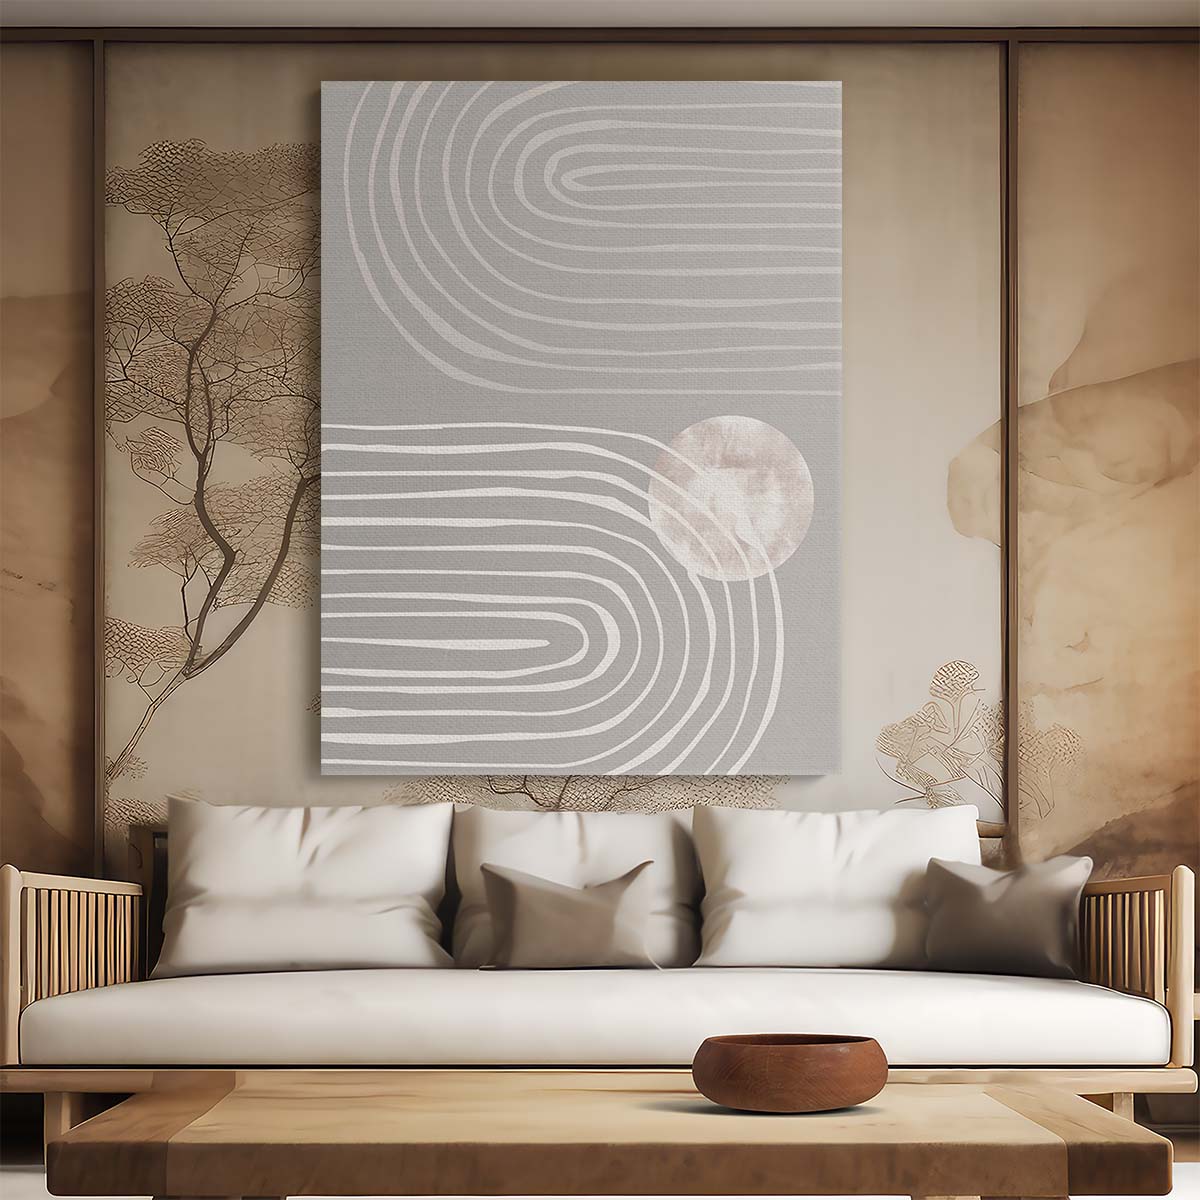 Illustrated Abstract Geometric Arch Artwork - Beige Circular Shapes by Luxuriance Designs, made in USA